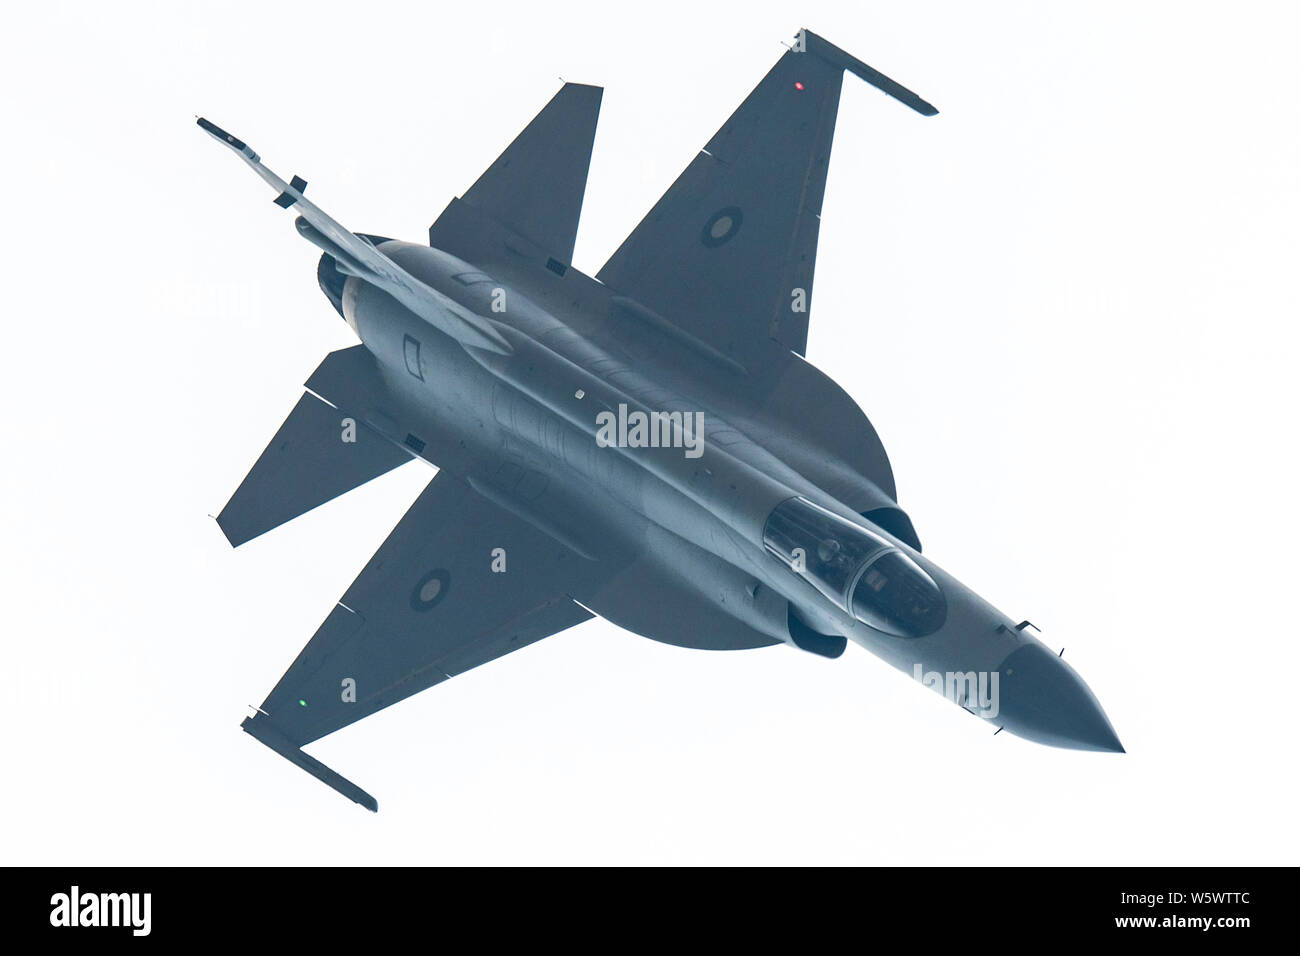 Pakistani Air Force's JF-17 Thunder (FC-1 Xiaolong or FC-1 Fierce Dragon) fighter jet takes part in a training session in preparation for the 12th Chi Stock Photo